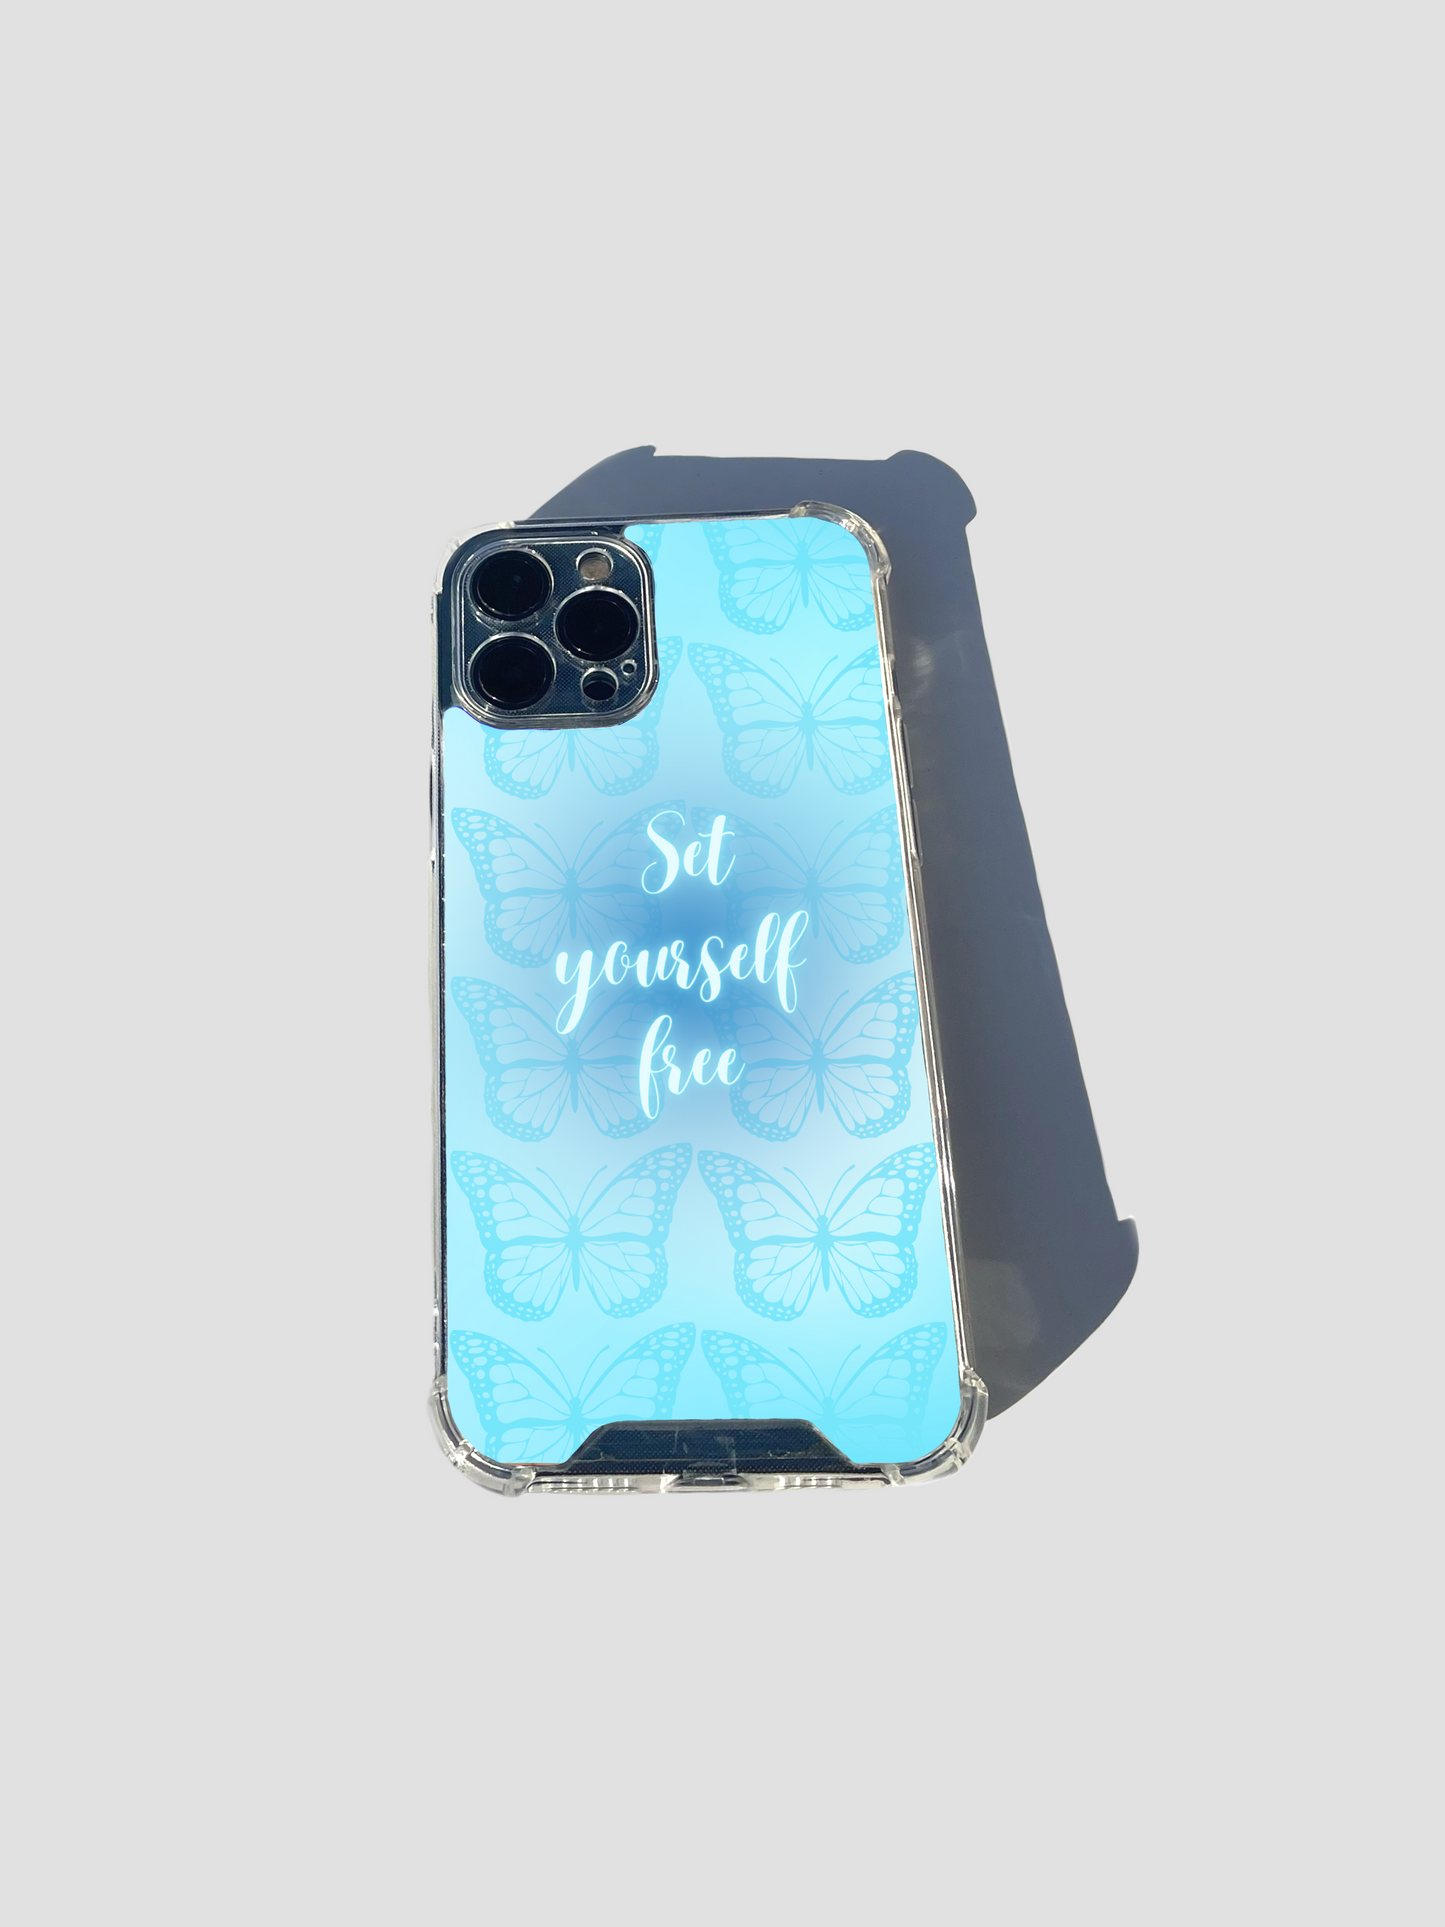 Set Yourself Free (Blue) Phone Case